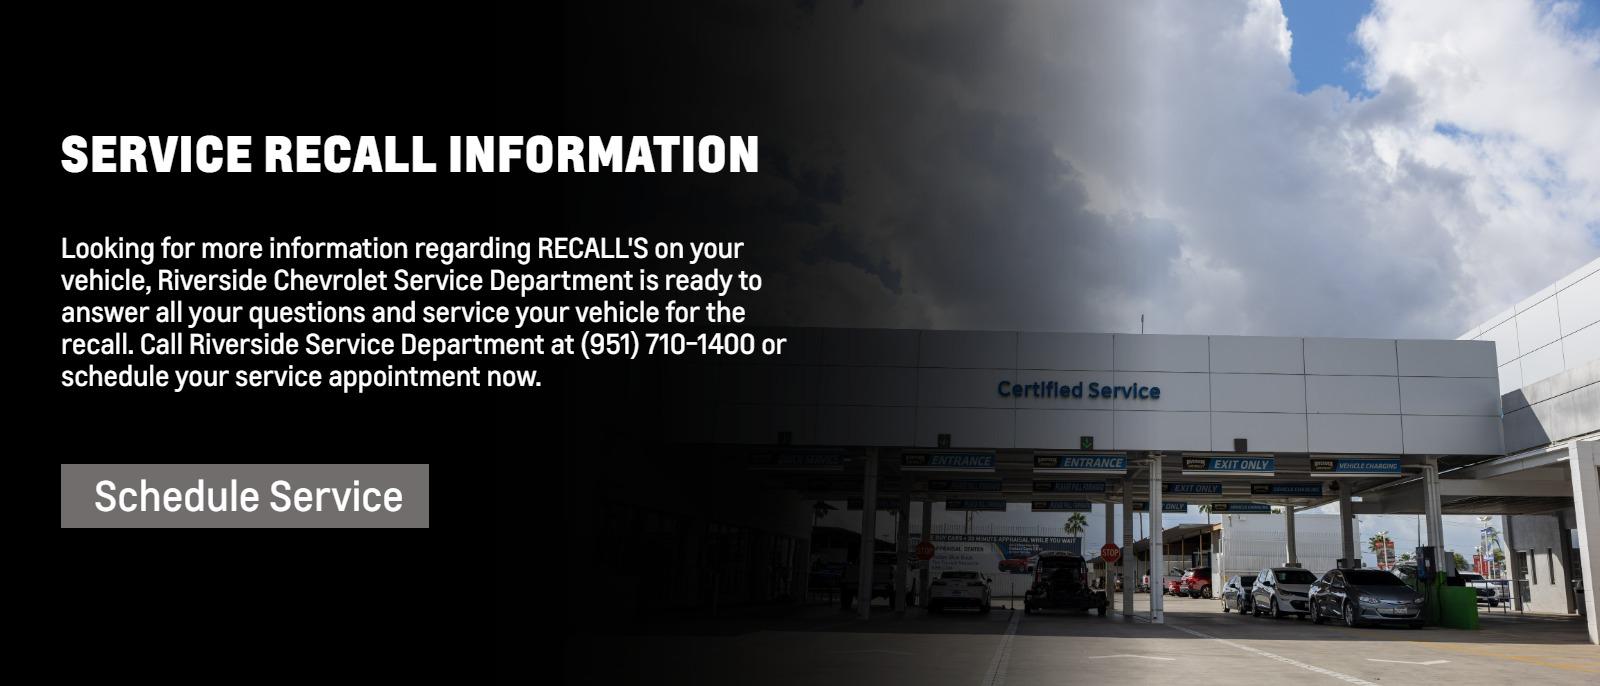 SERVICE RECALL INFORMATION AND WE SERVICE RECALLS!

Looking for more information regarding RECALL'S on your vehicle, Riverside Chevrolet Service Department is ready to answer all your questions and service your vehicle for the recall. Call Riverside Service Department at (951) 710-1400 or schedule your service appointment now.